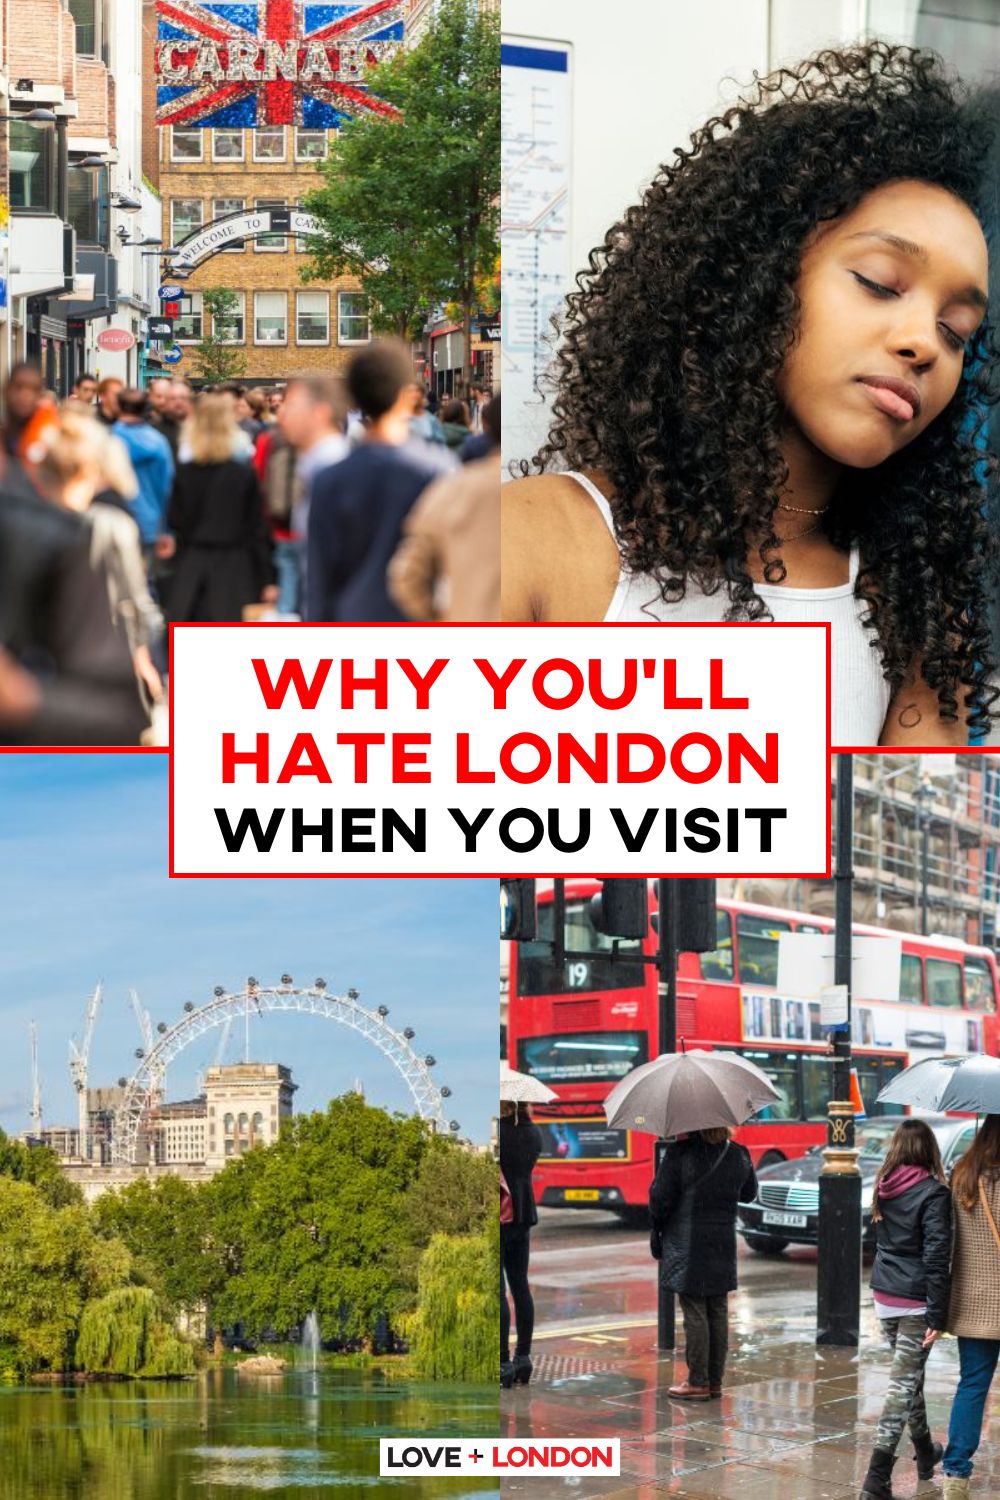 This is an image of a Pinterest pin detailing 'Why You'll Hate London When You Visit"